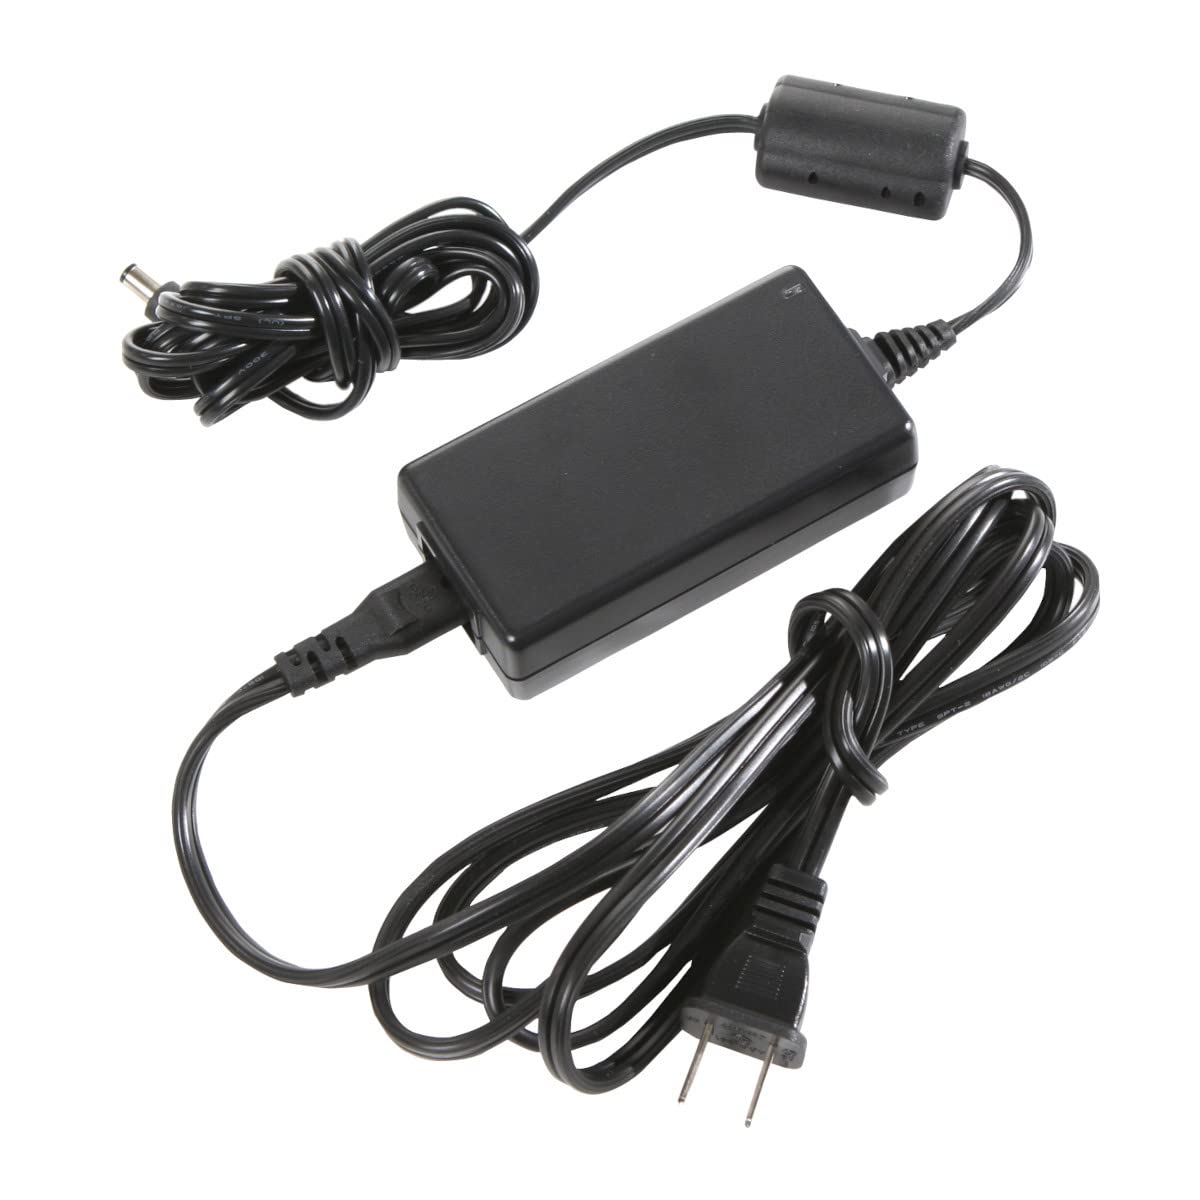 Brady M210 / BMP21 Printer Accessory - AC Adapter - NA (M210-AC). for use with M210, M210-LAB, and BMP21-PLUS Printers.,Black, Large